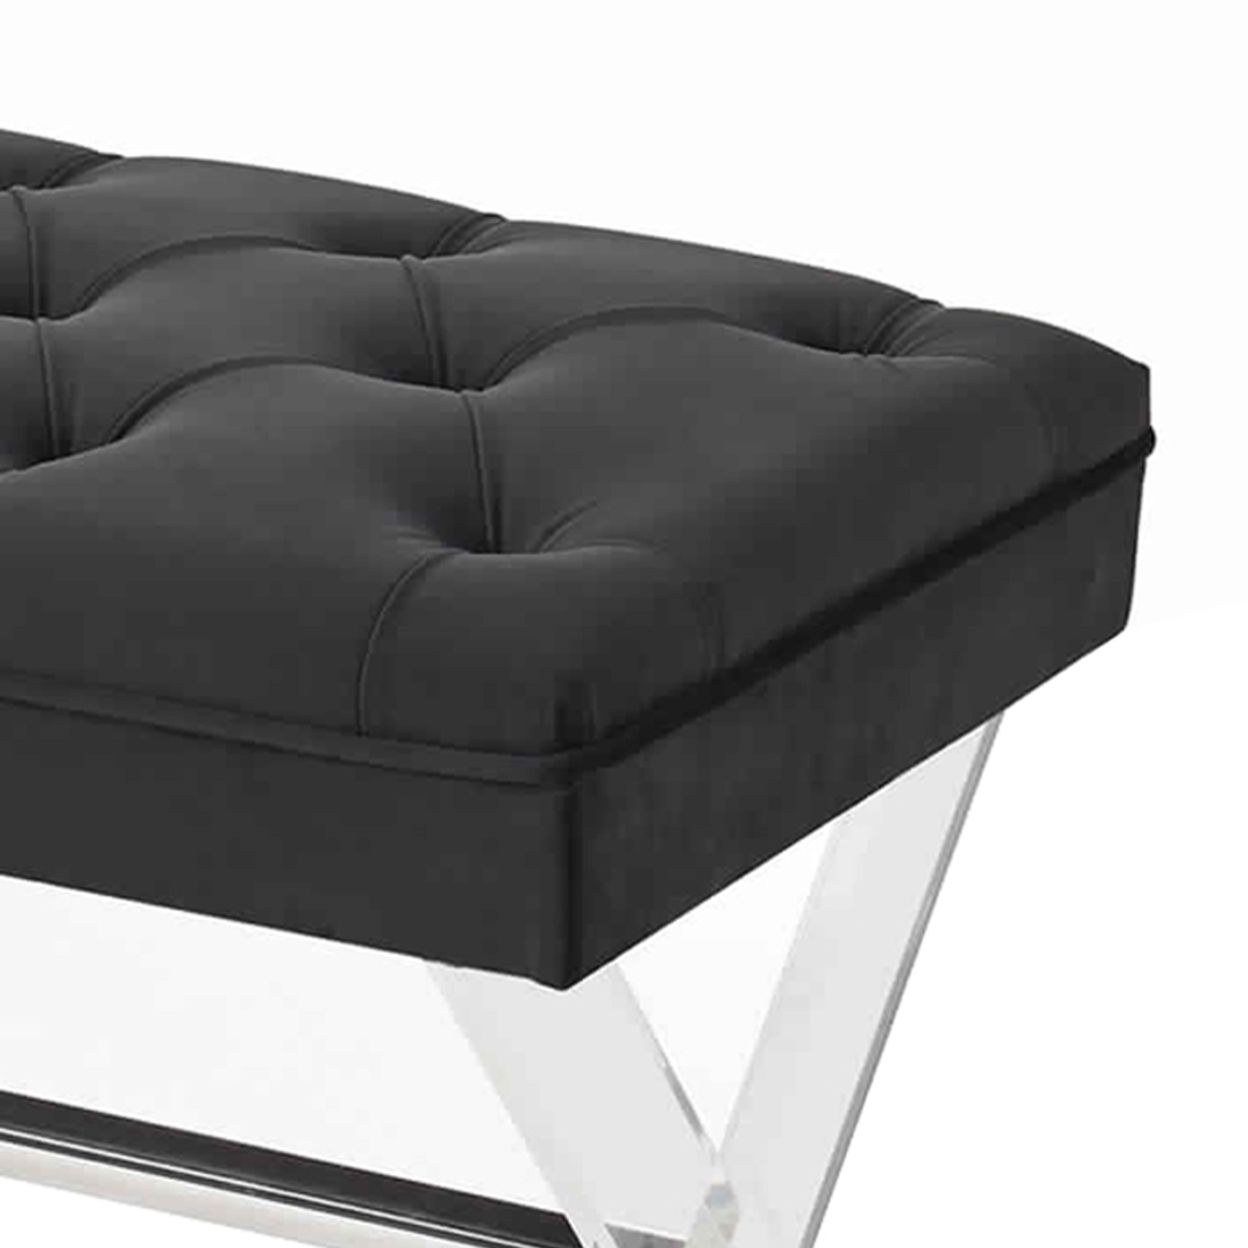 Trendy Buy Button Tufted Fabric Ottoman Bench With X Shaped Acrylic Legs Regarding Black Fabric Ottomans With Fringe Trim (View 9 of 10)